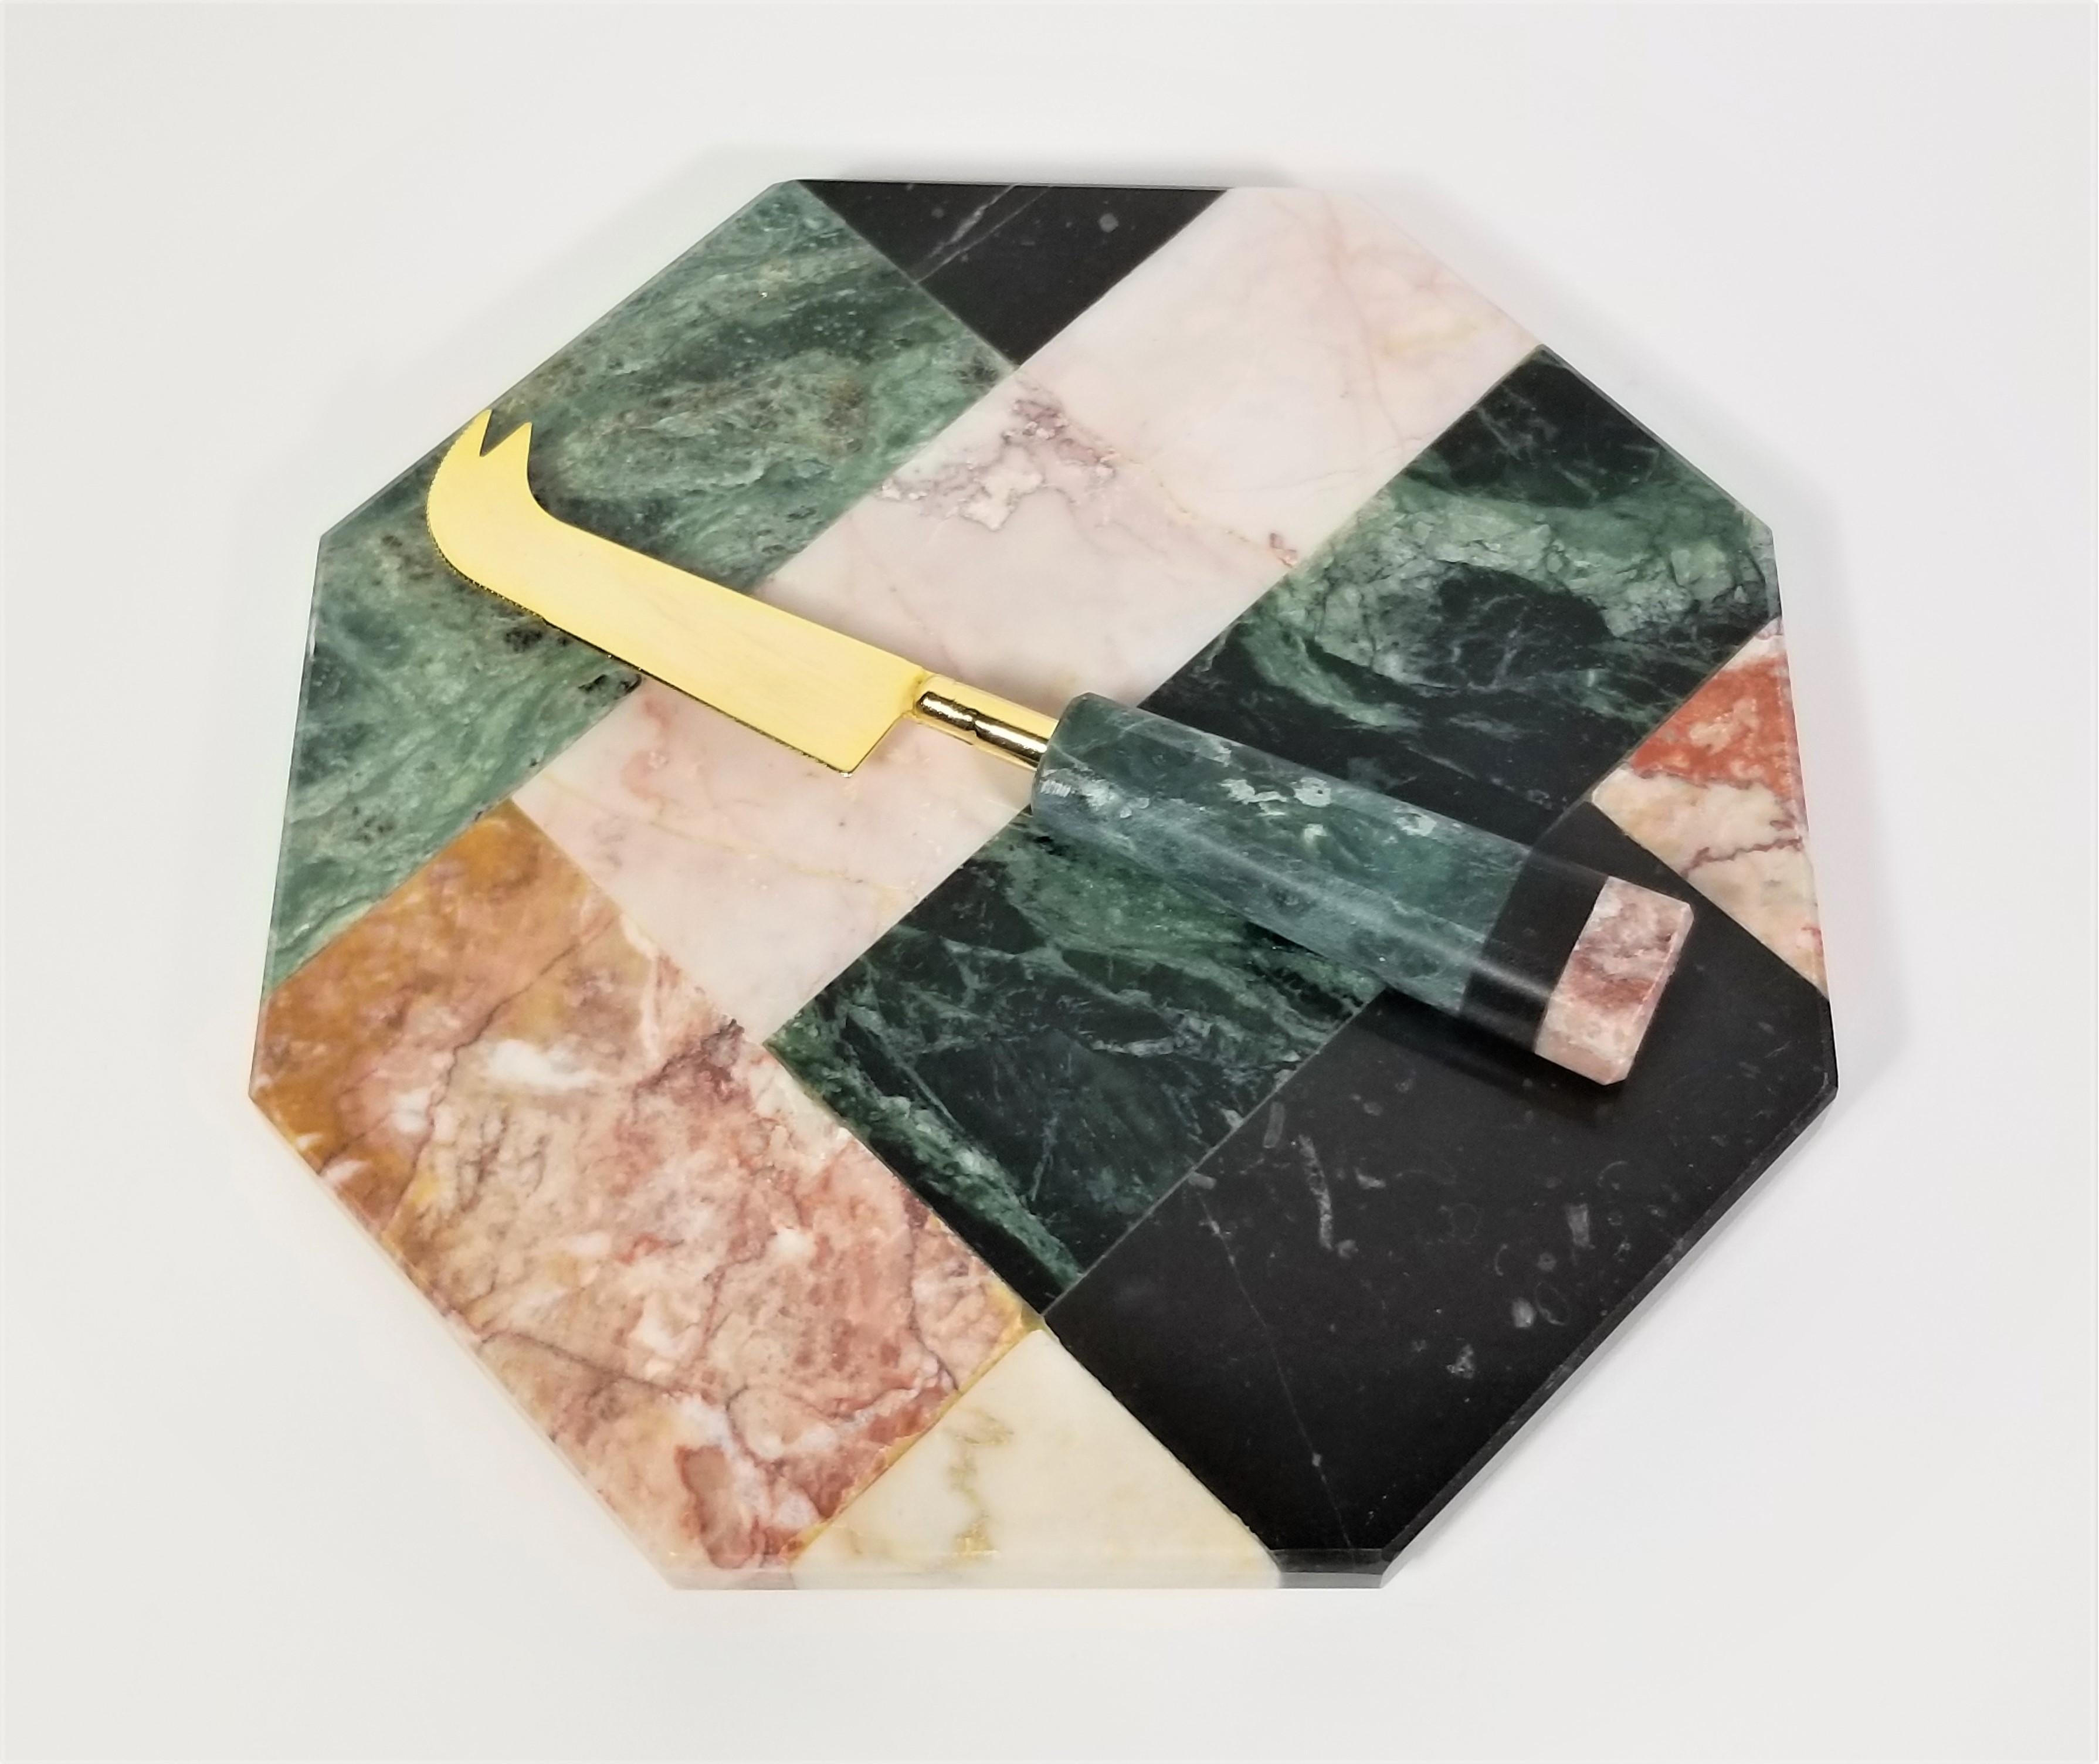 1970s Marble Cheeseboard set. Multicolored Marble. Footed Board. Matching Knife / Spreader. Original Satin Holder. Cheeseboard and Knife are in Excellent Condition.